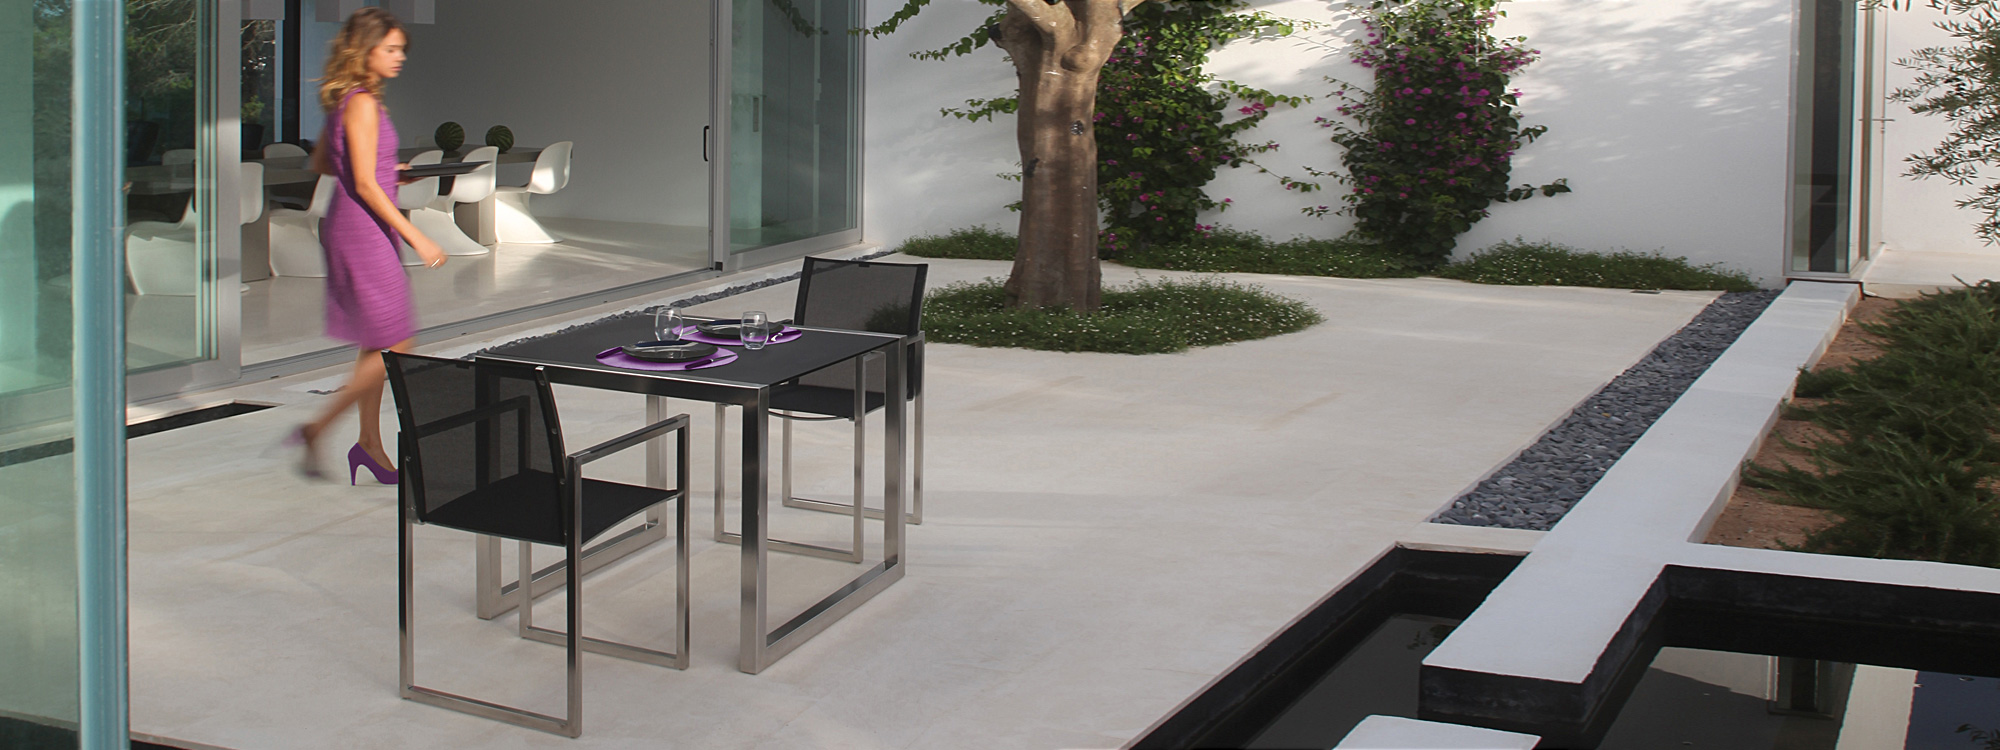 photo of architectural garden dining furniture